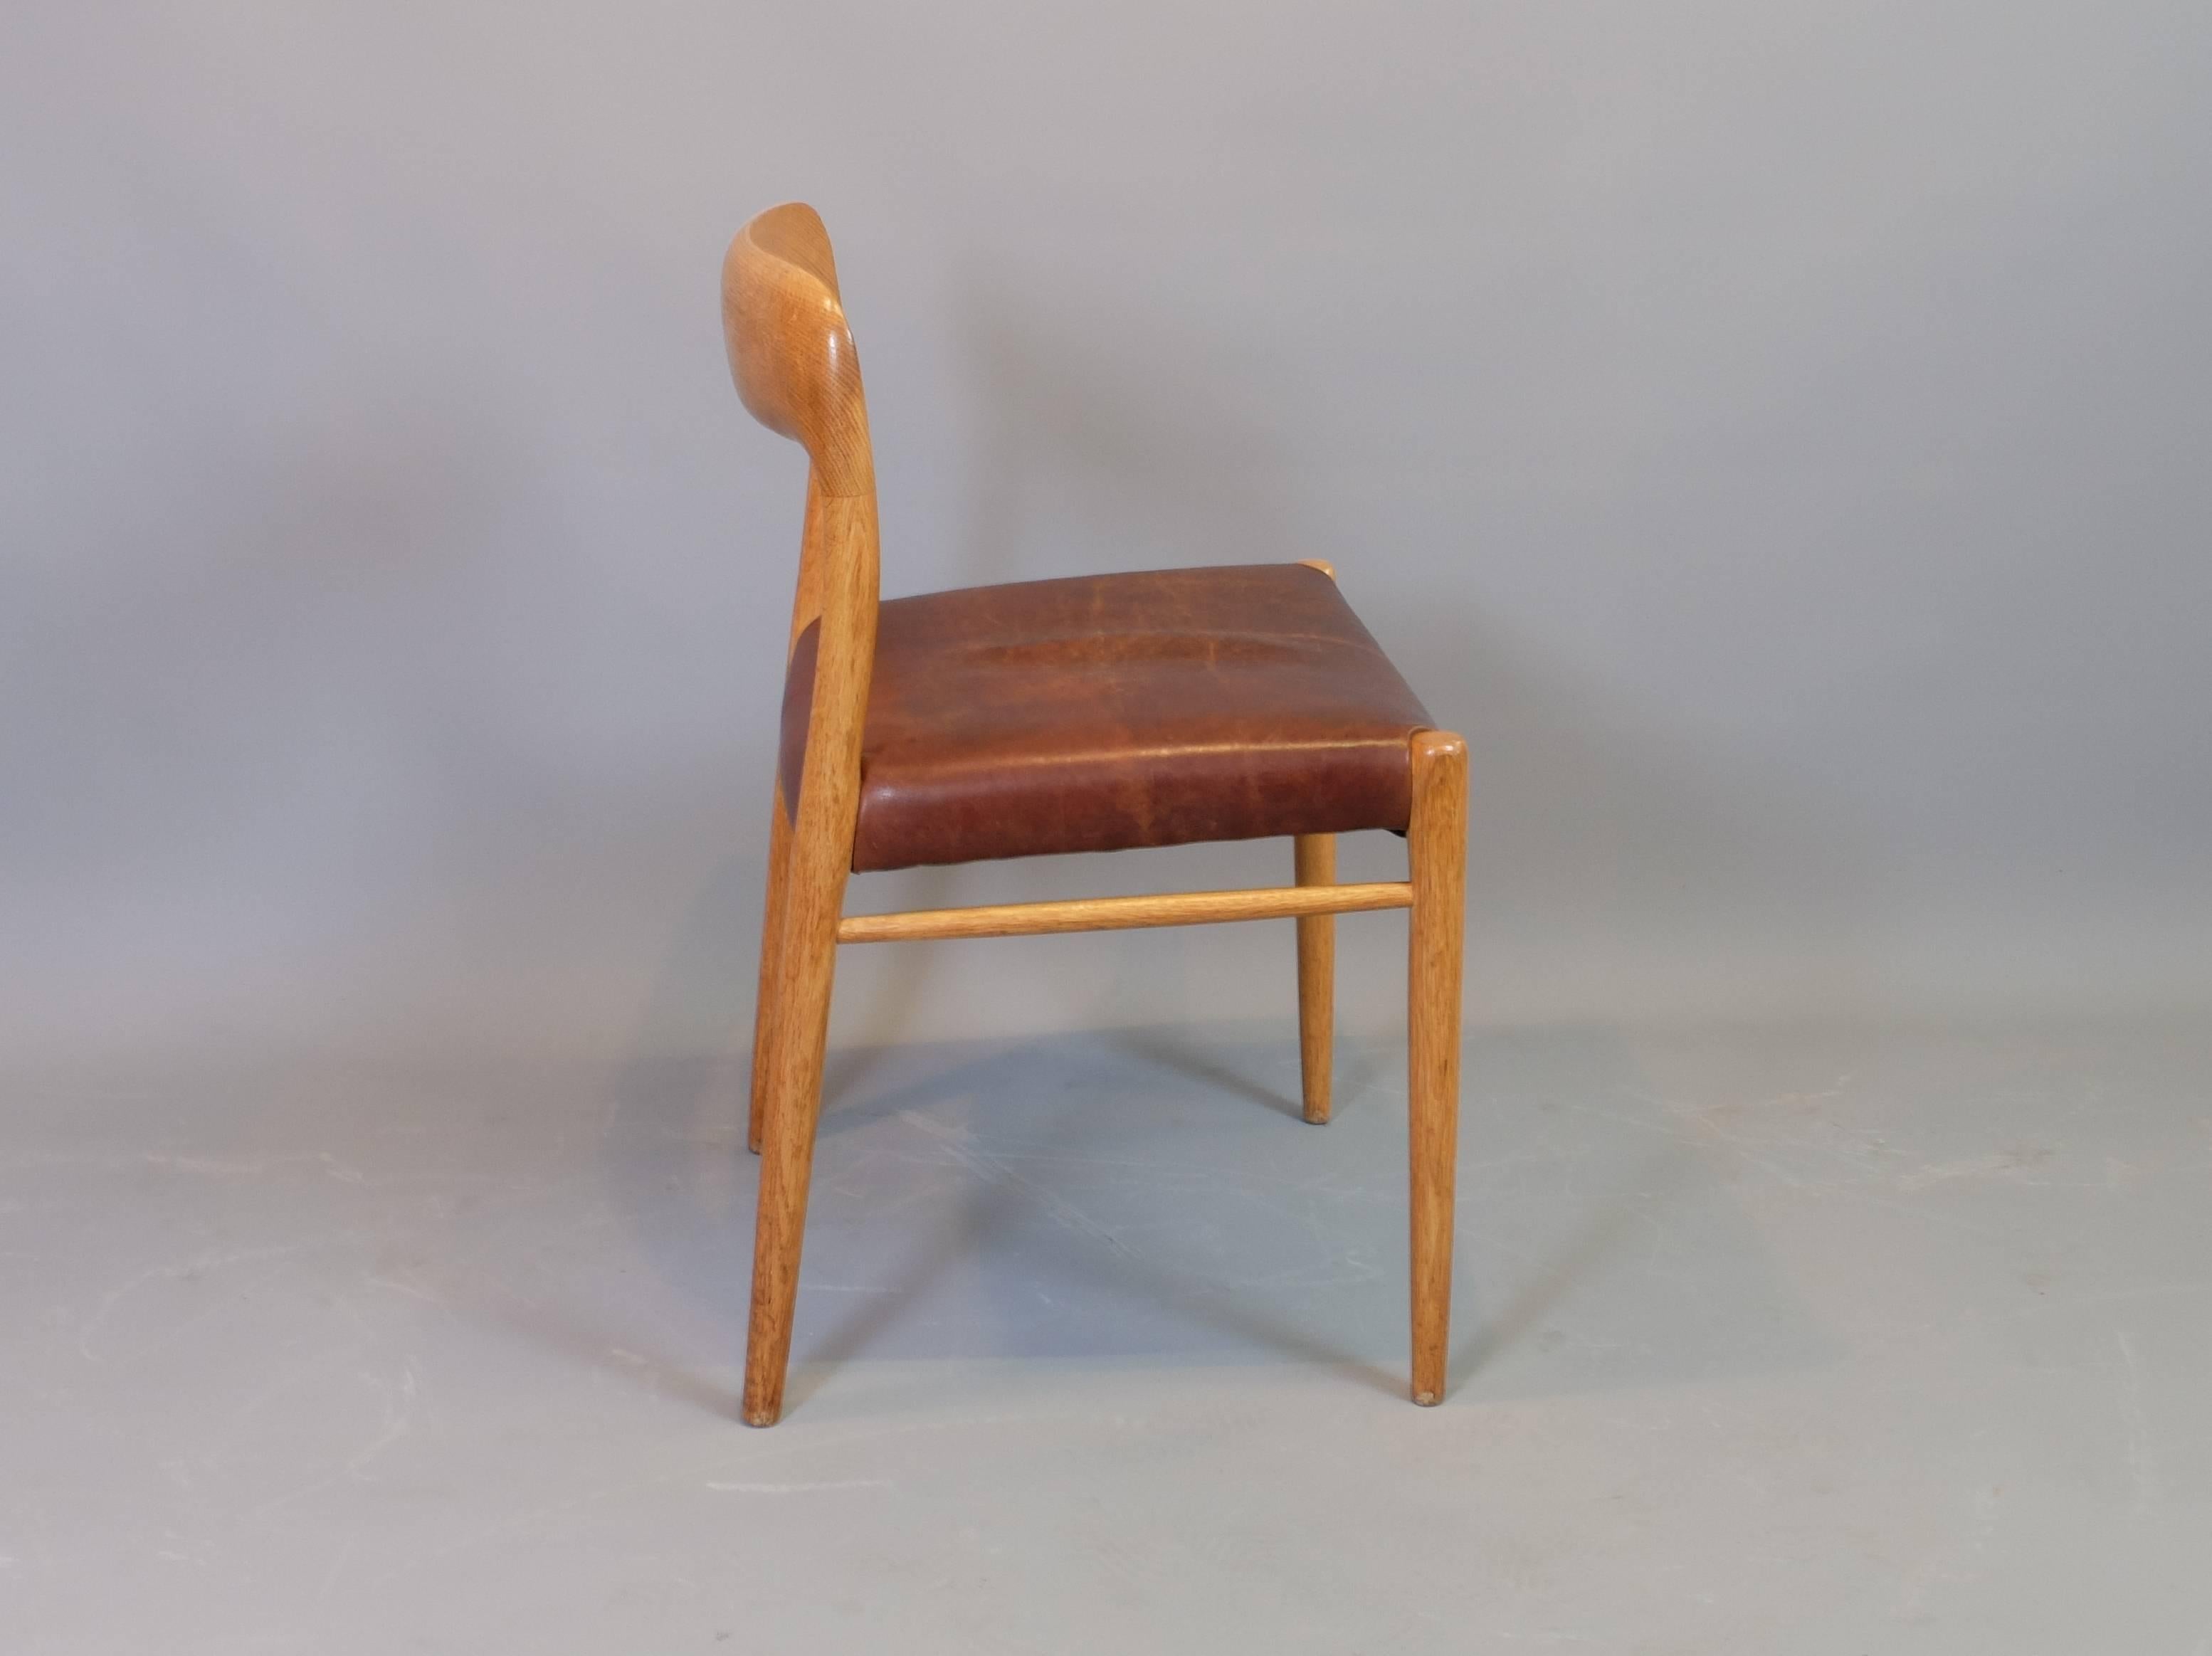 Early production Niels O Moller model 75 oak dining chairs manufactured by J L Moller, Denmark, circa 1960. We have two of these chairs in teak but are usually able to source larger sets should you require. These chairs are in excellent condition